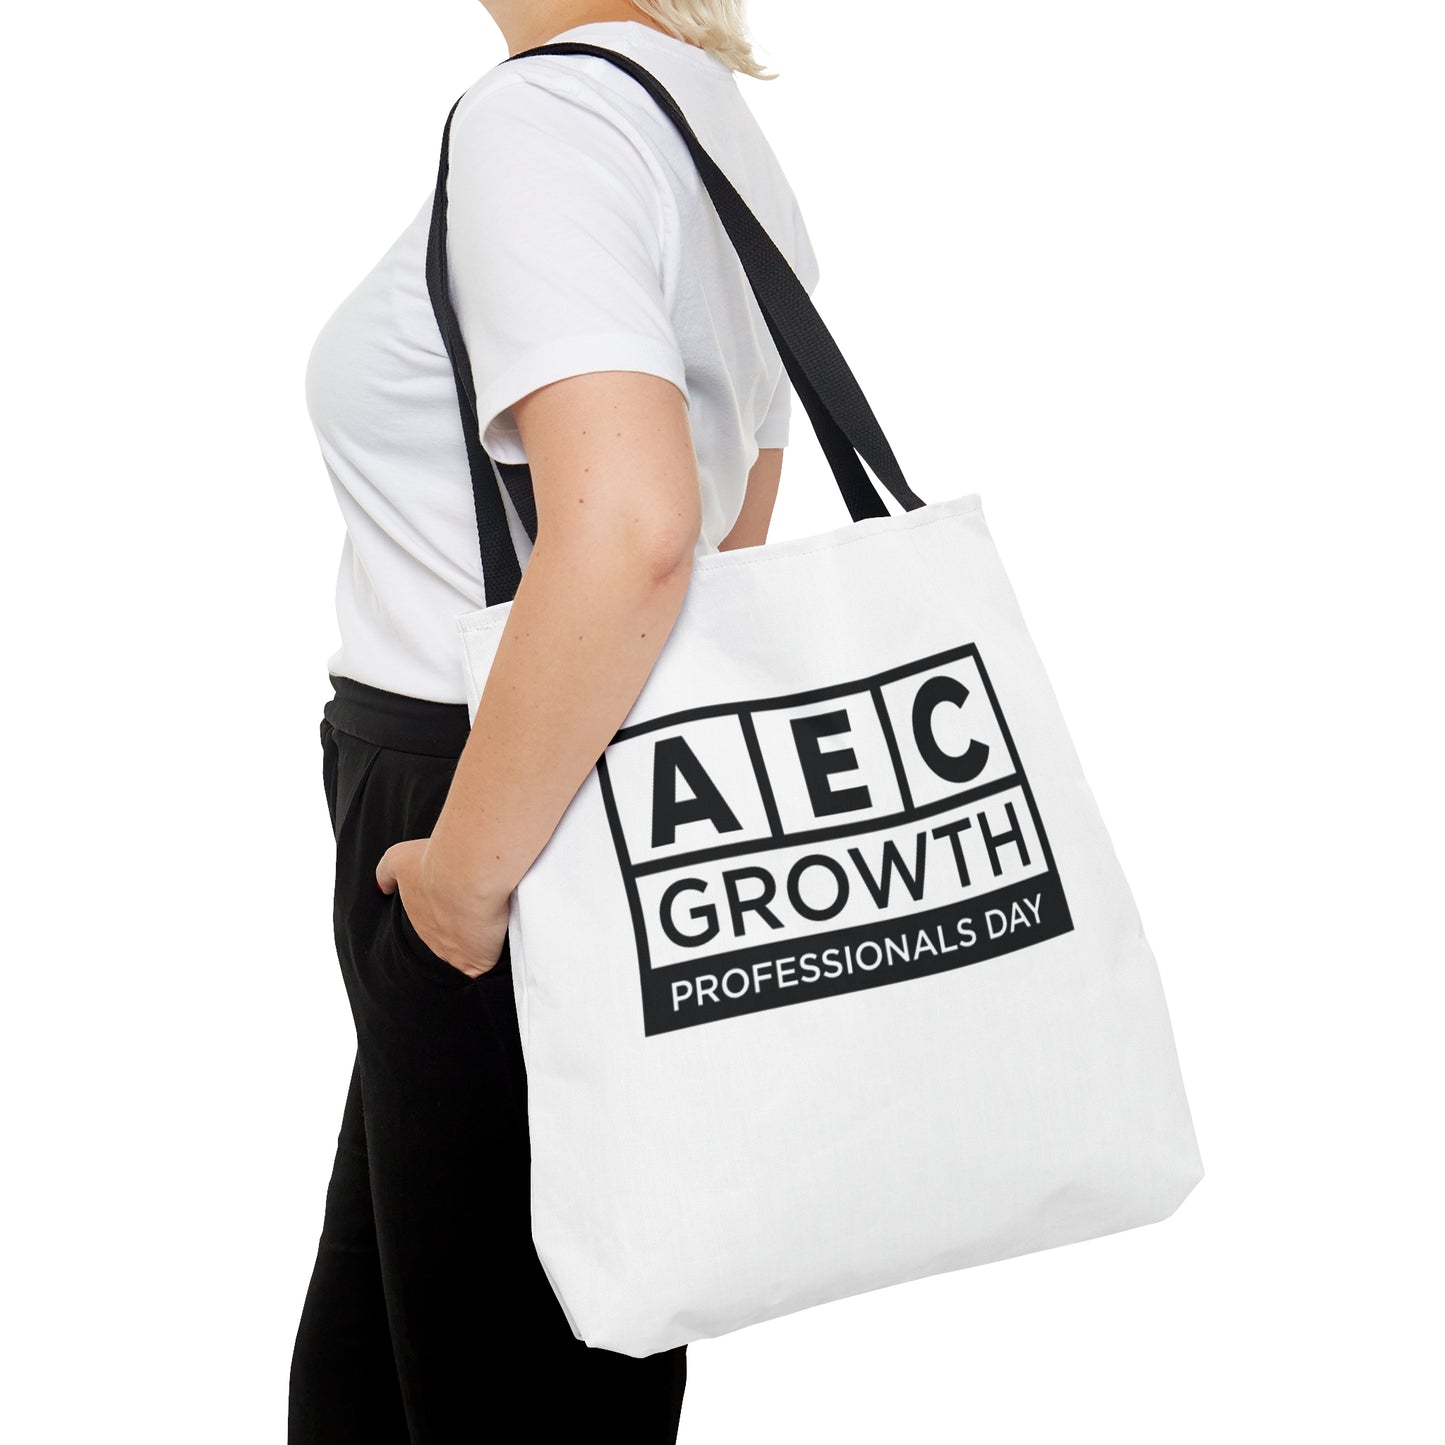 AEC Growth Professionals Day Tote Bag - Black